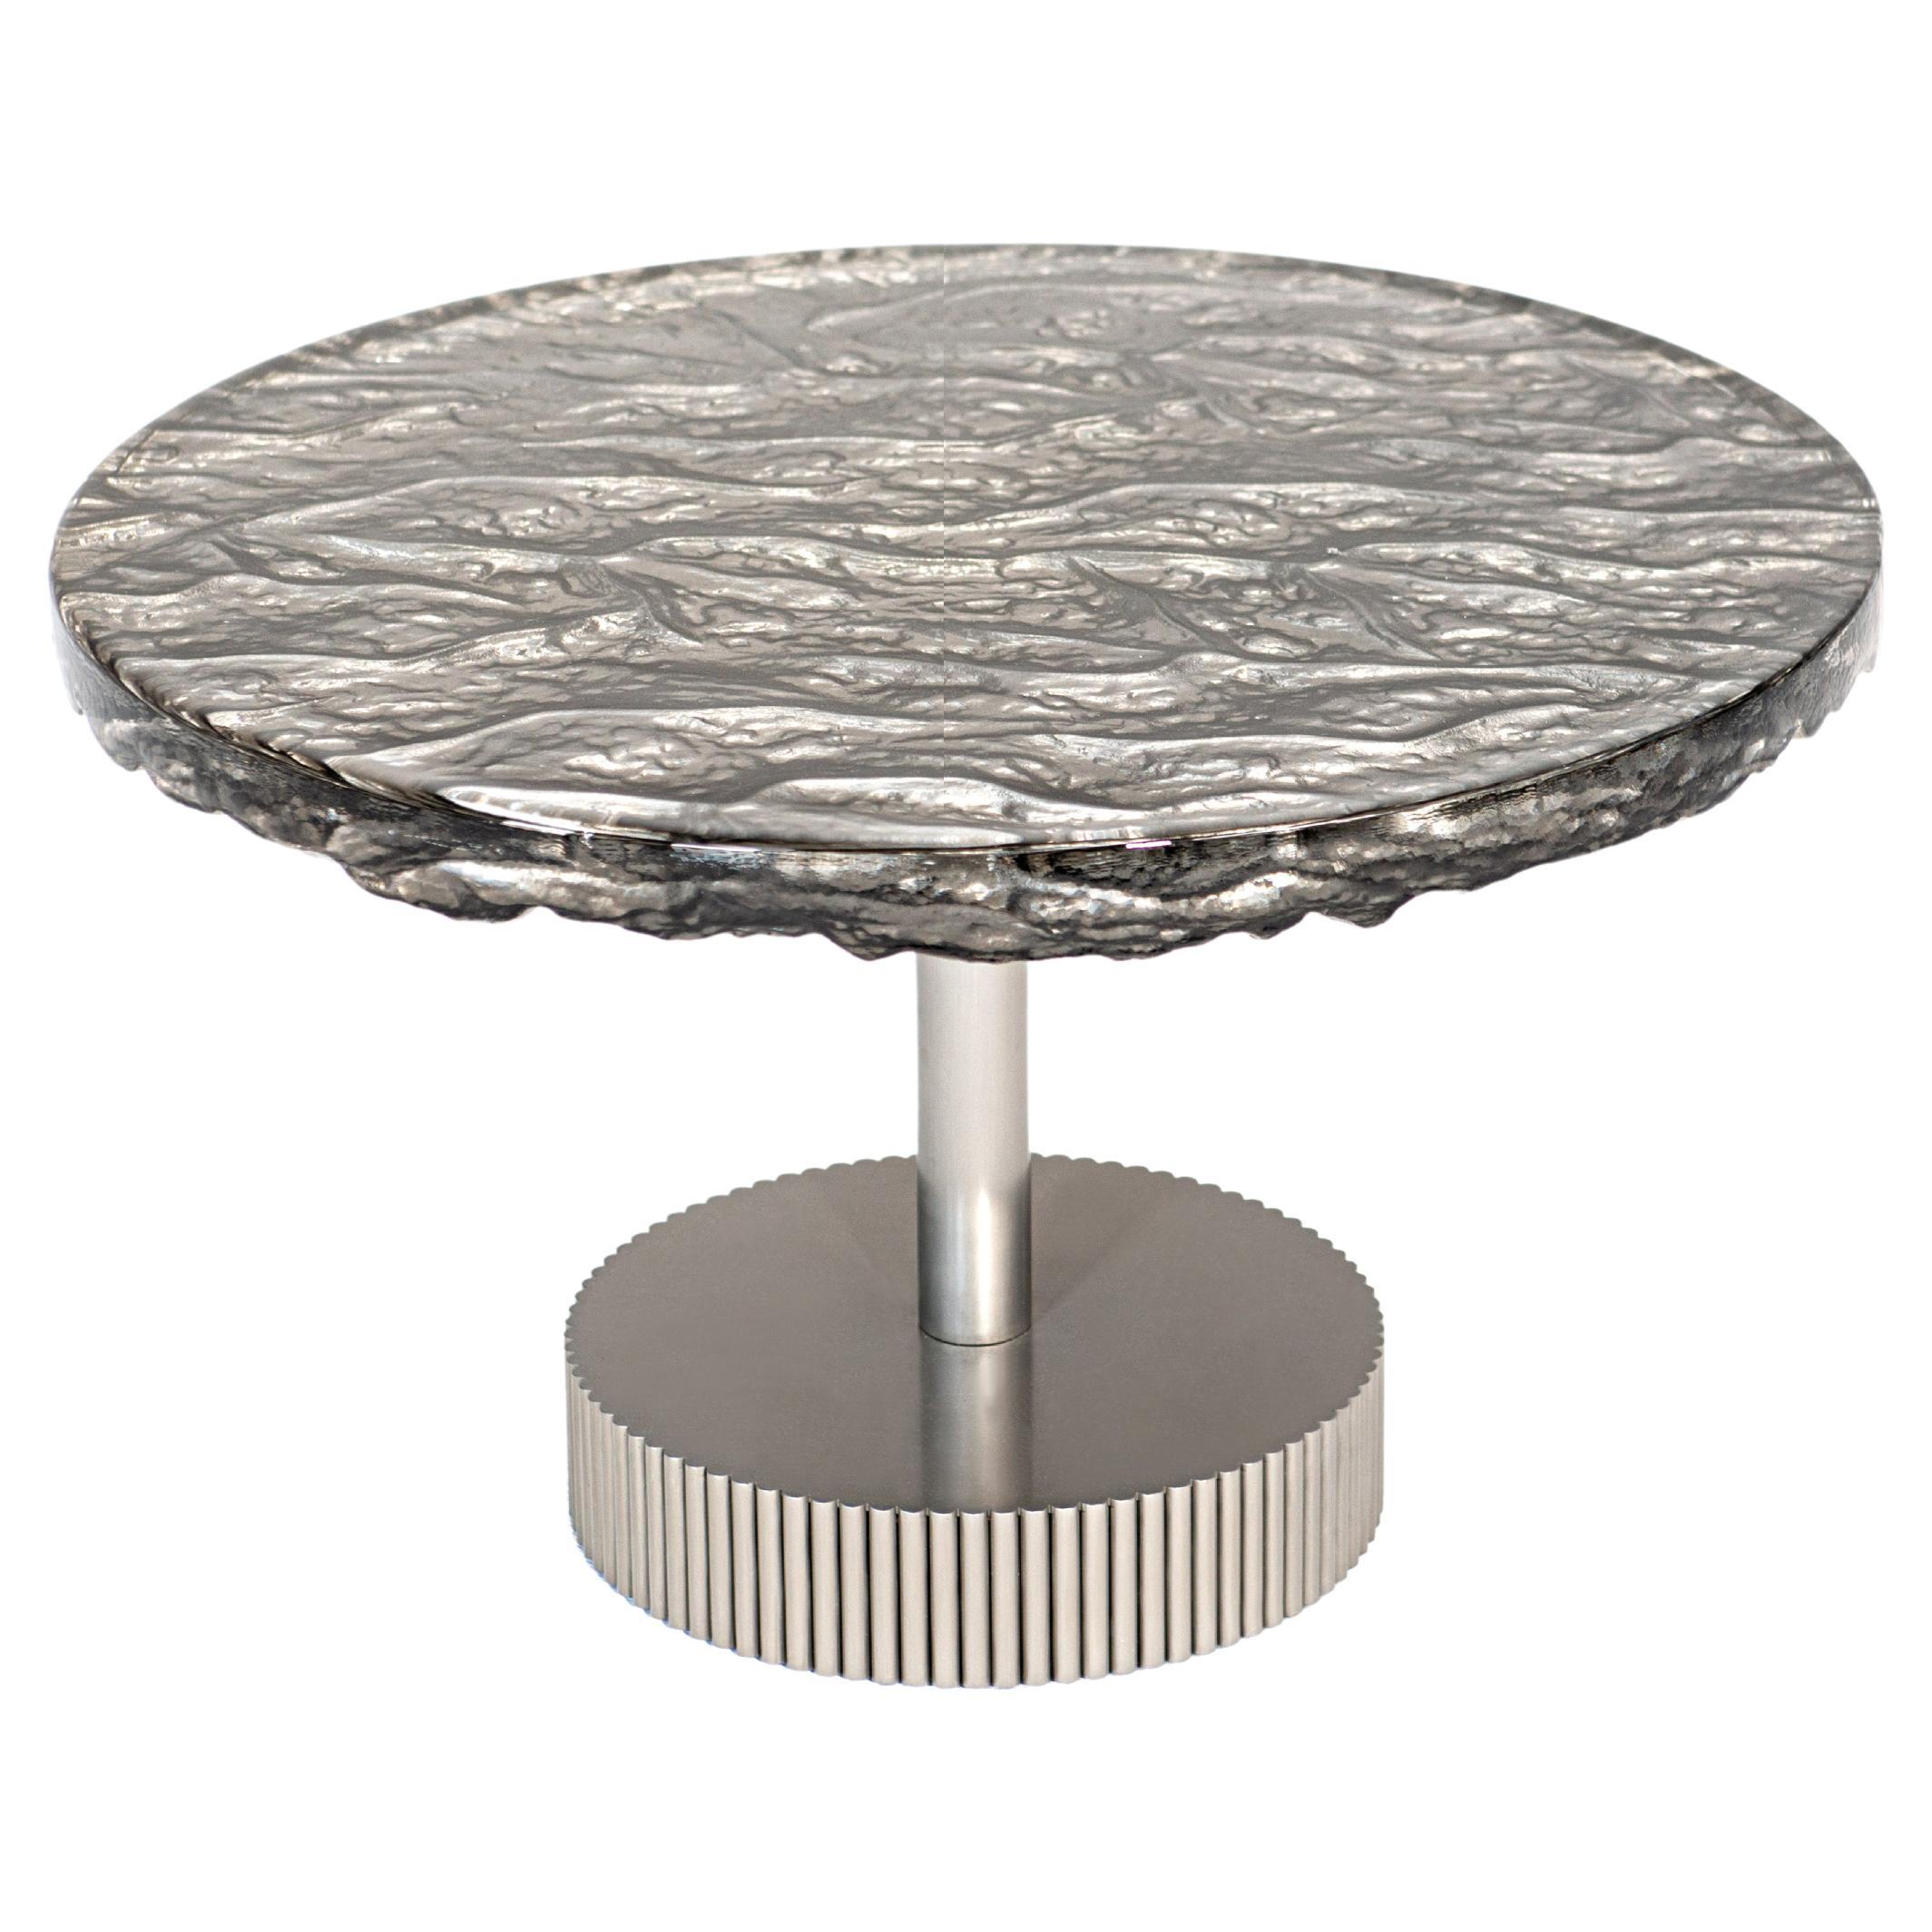  Contemporary Side Table by Hessentia with black back-painted artistic Glass top For Sale